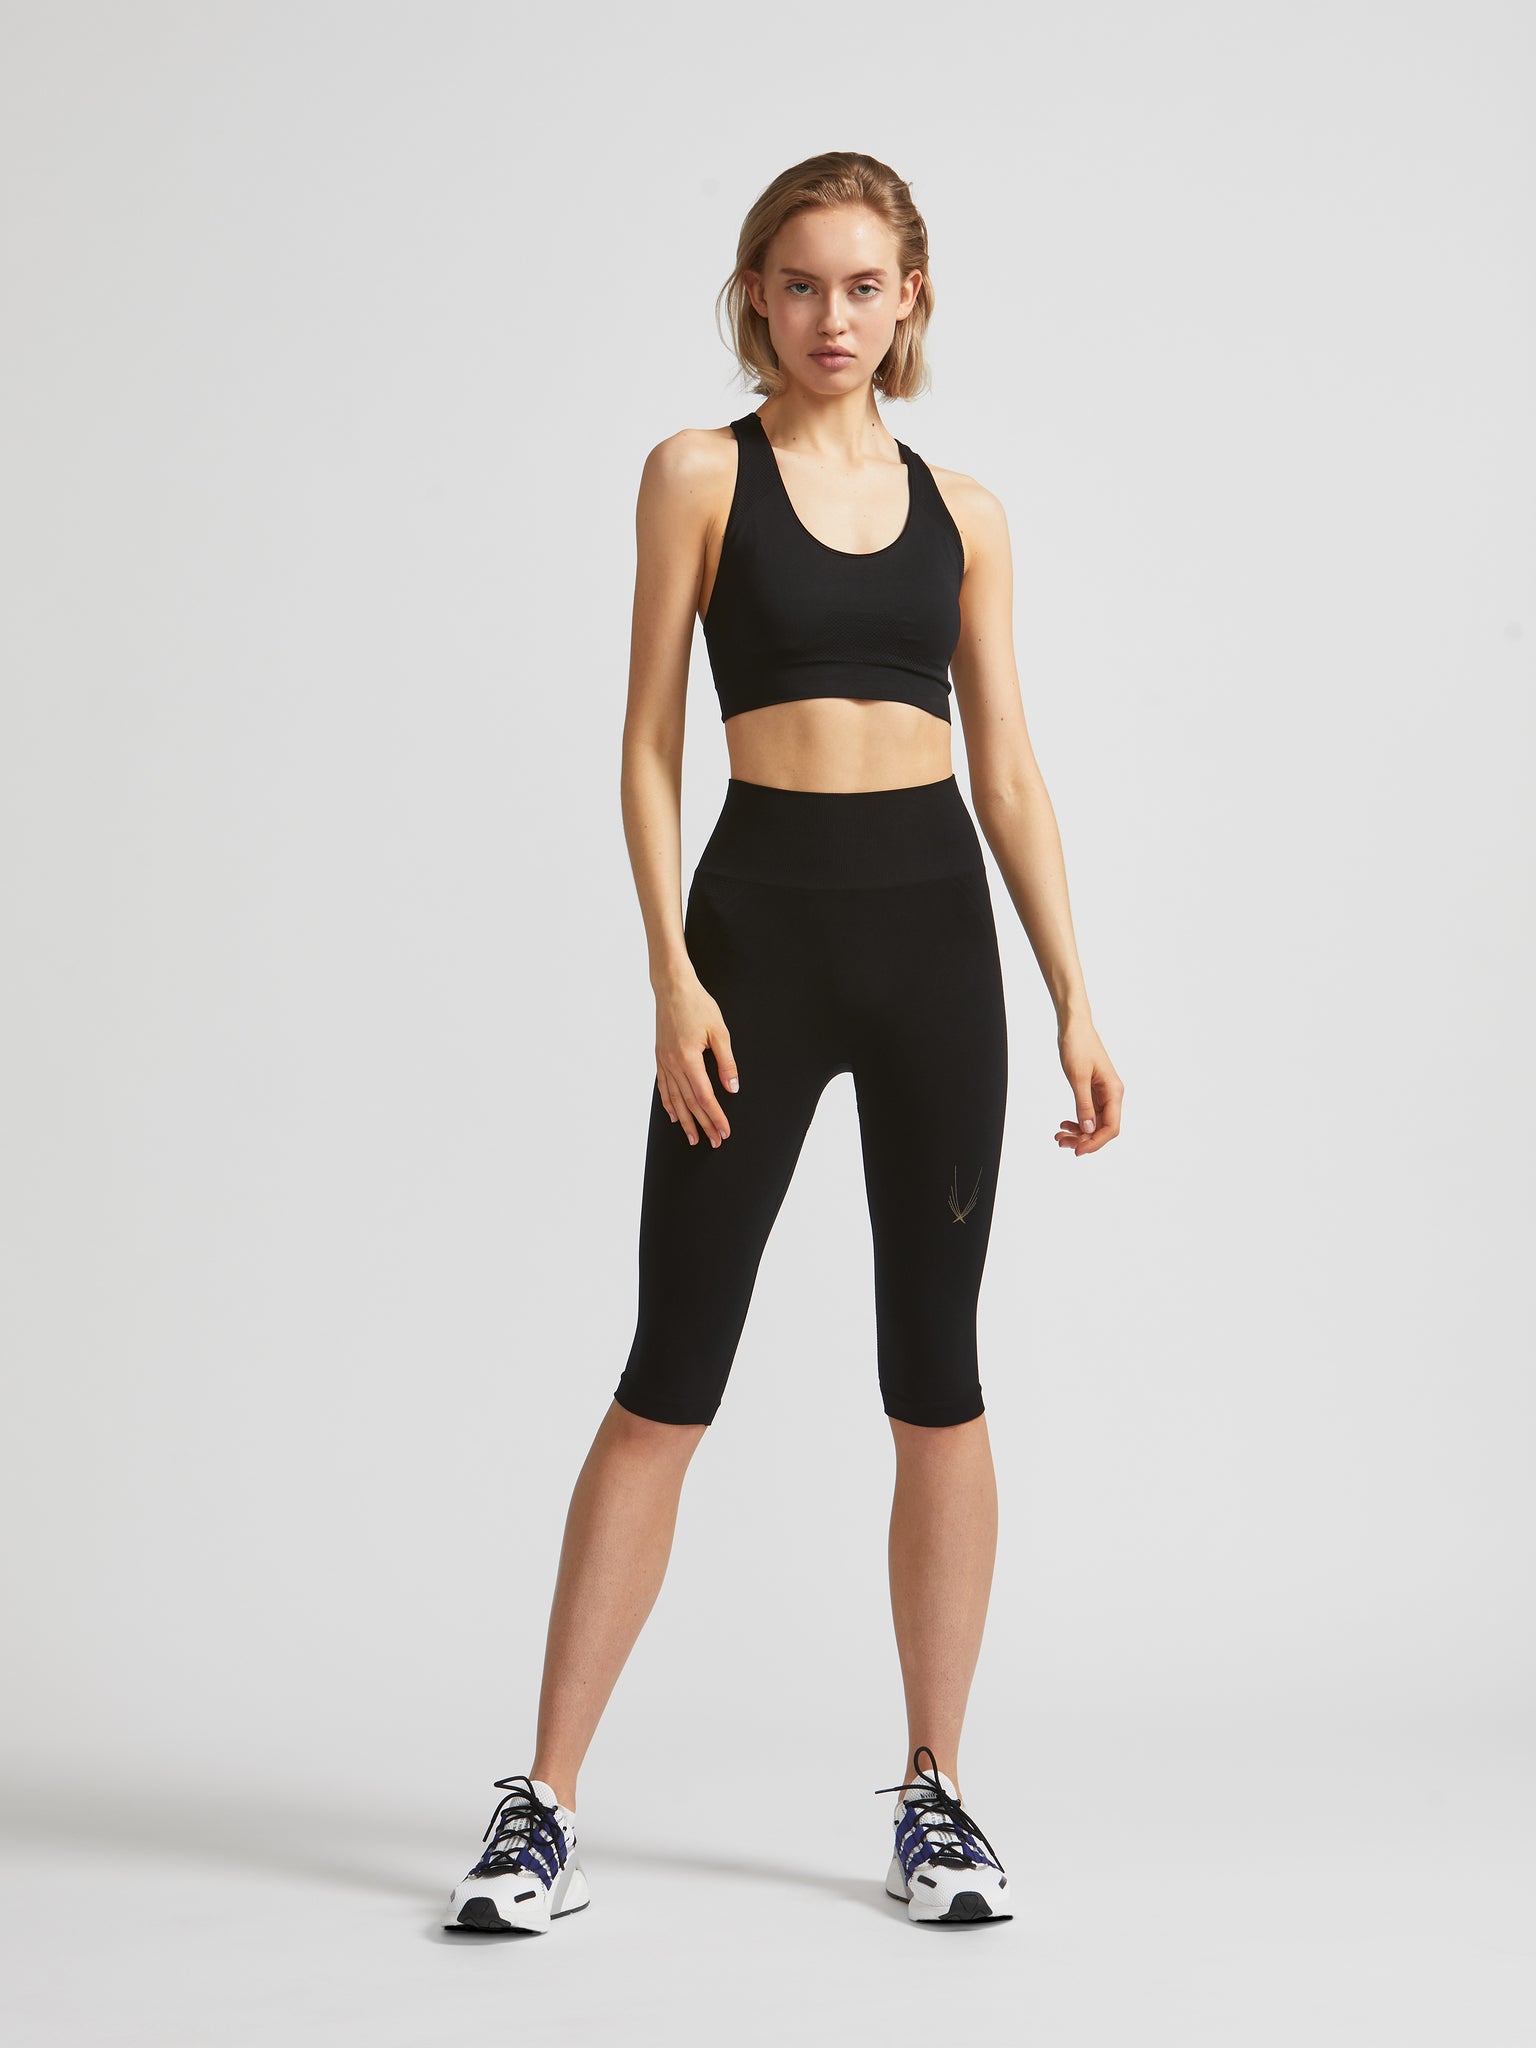 high waisted seamless black capri leggings with breathable panels. Ideal for yoga, Pilates, barre